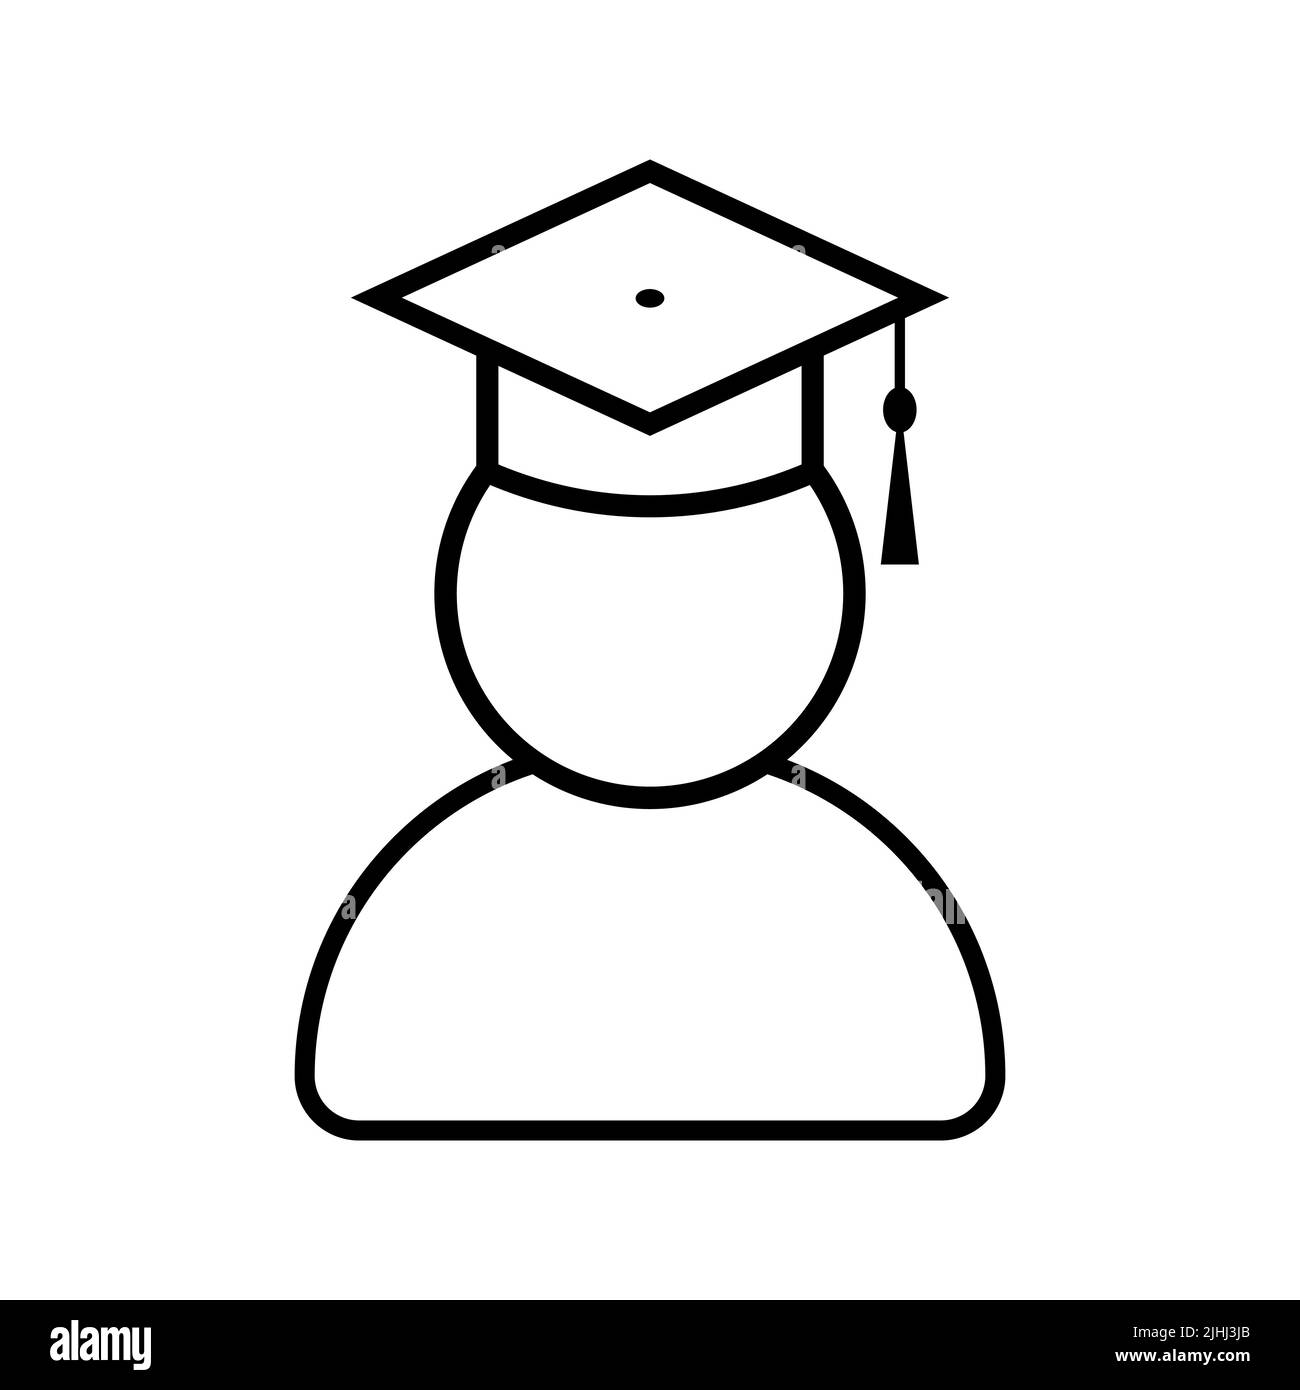 Graduate student with graduation cap icon isolated on white background. Vector illustration Stock Vector